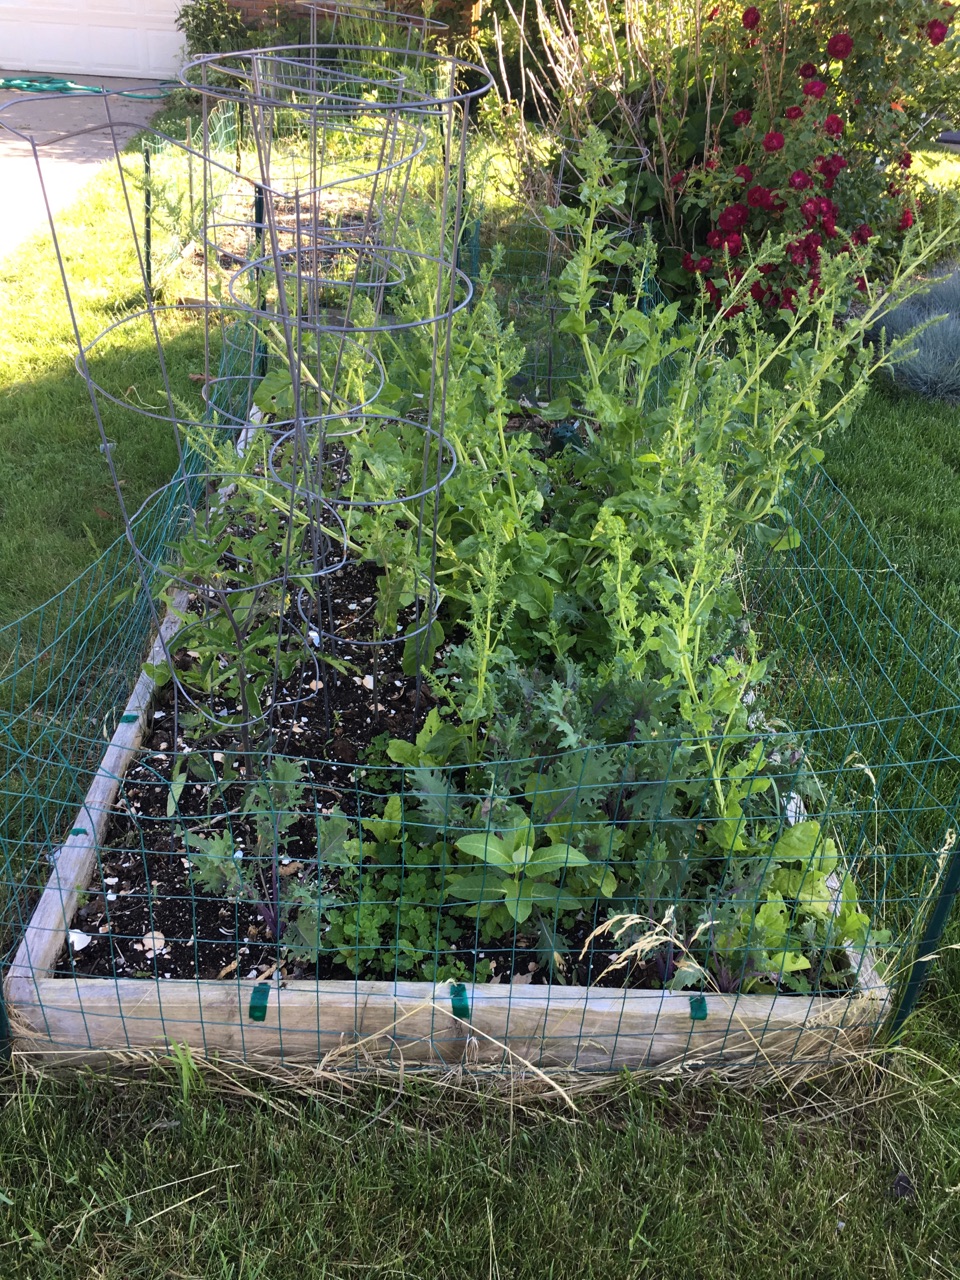 a 6 inch tall raised bed with 5-6 tomato plants in cages and some weedy looking chard and small kale seedlings surrounded by a chicken wire fence. Some hedge roses are in the background